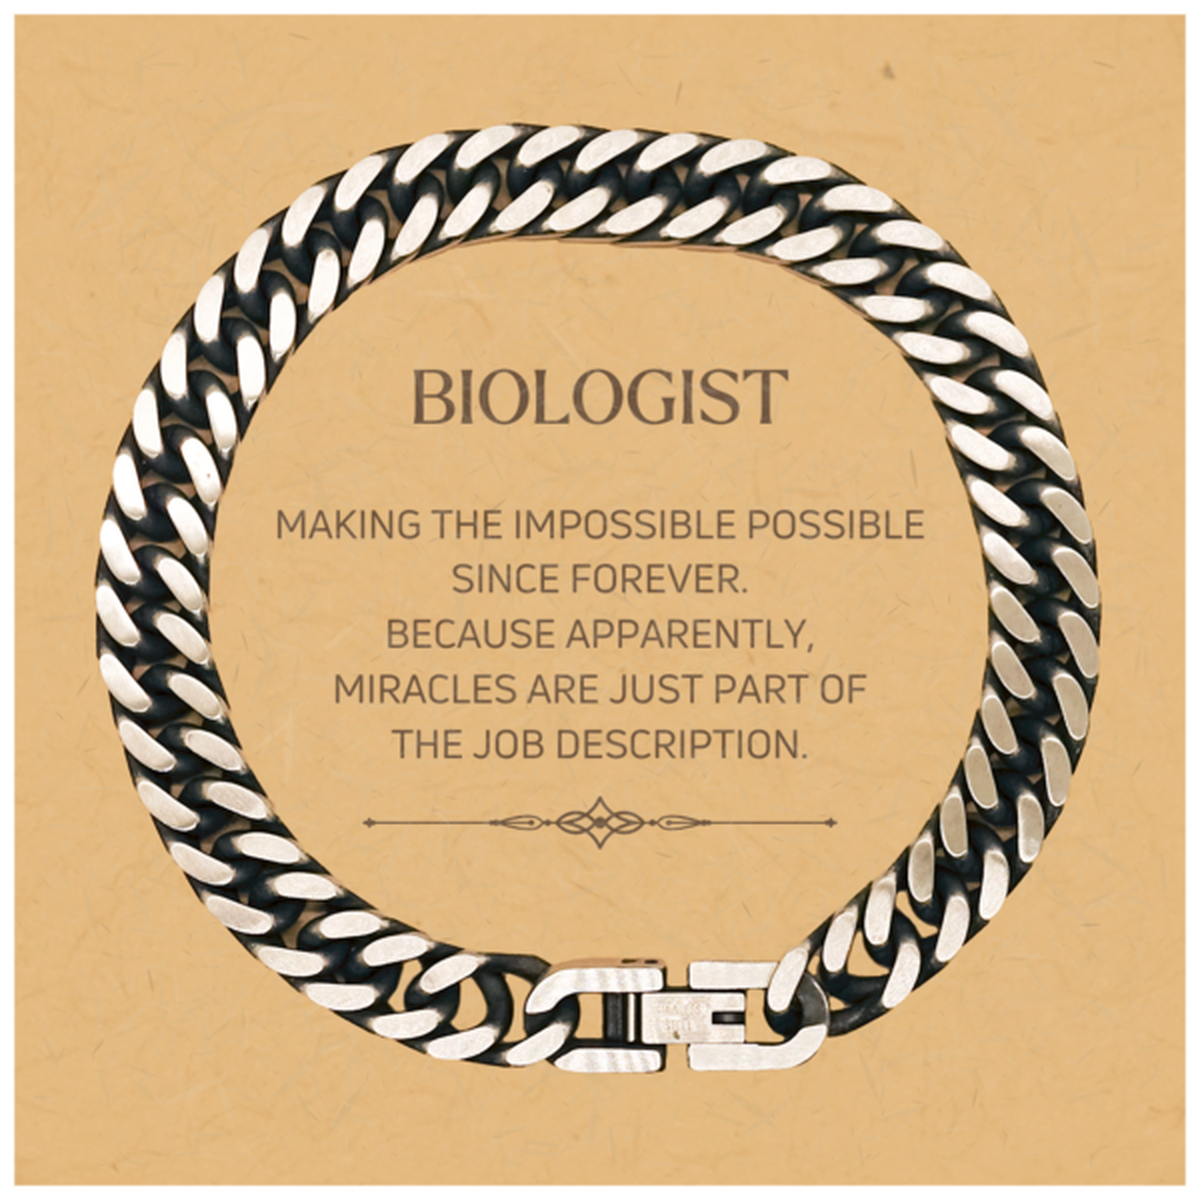 Funny Biologist Gifts, Miracles are just part of the job description, Inspirational Birthday Christmas Cuban Link Chain Bracelet For Biologist, Men, Women, Coworkers, Friends, Boss